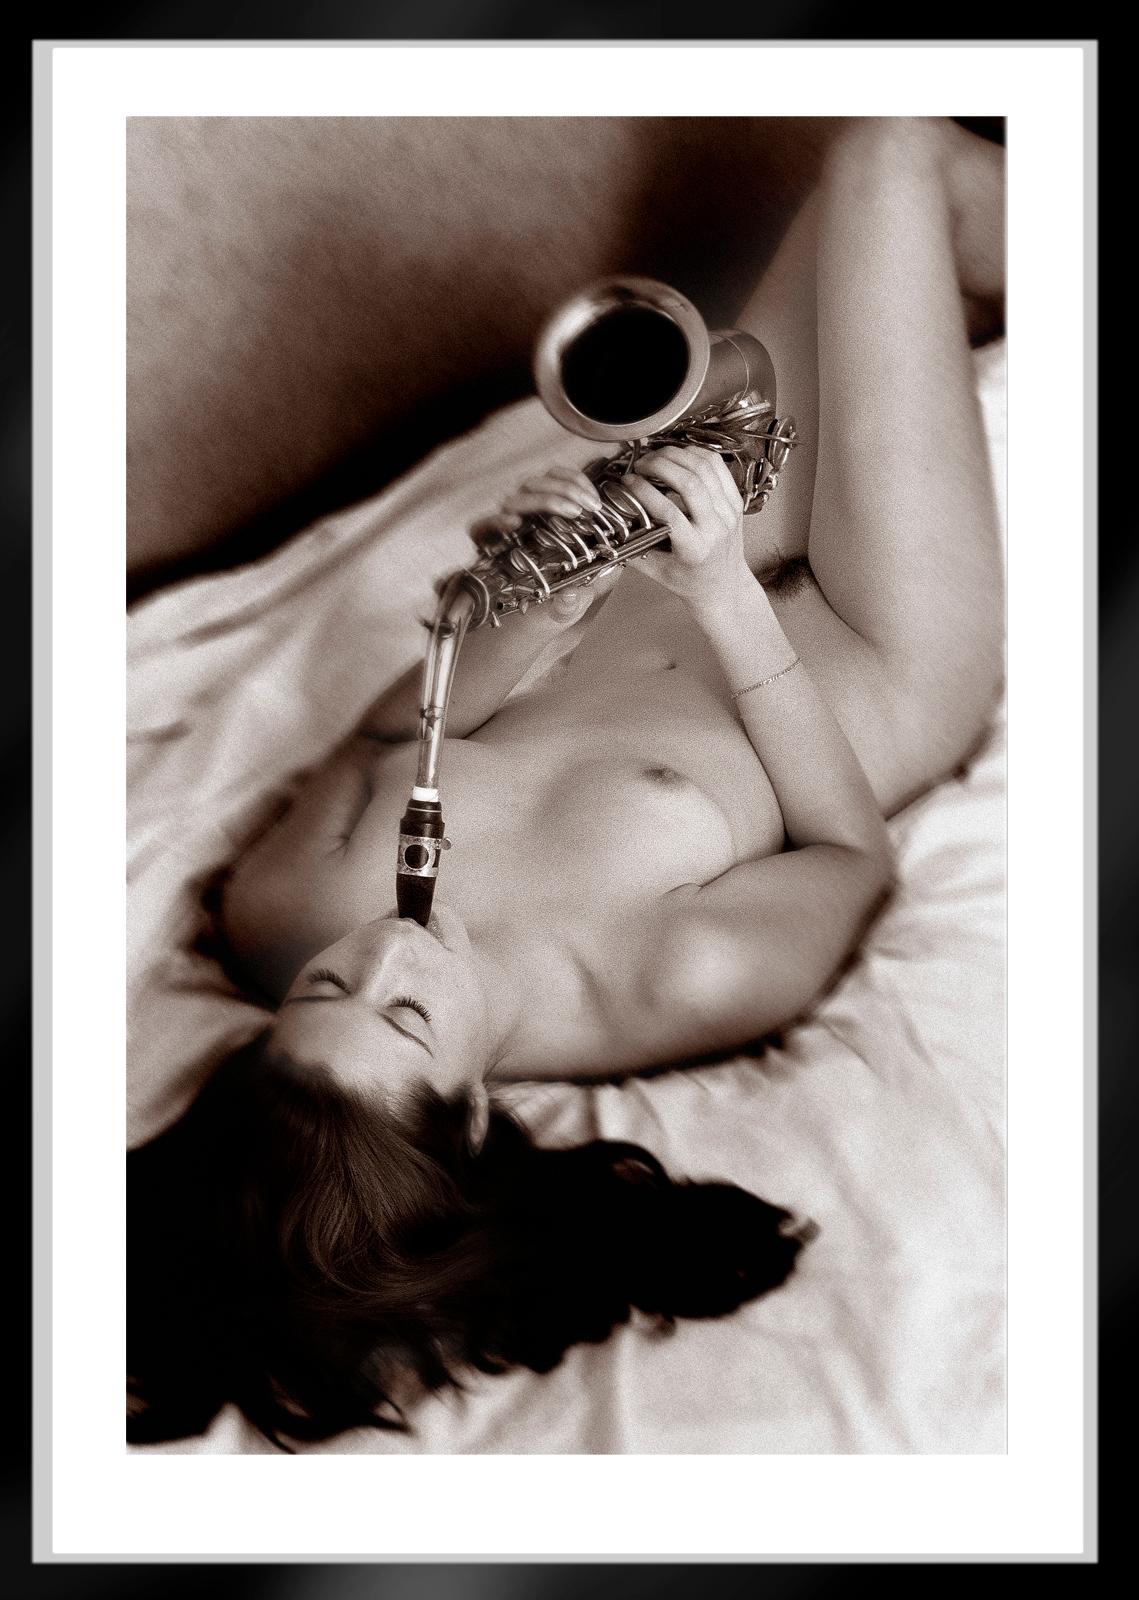 Sax- Signed limited edition sepia print, Contemporary nude woman photo in bed - Gray Nude Photograph by Ian Sanderson